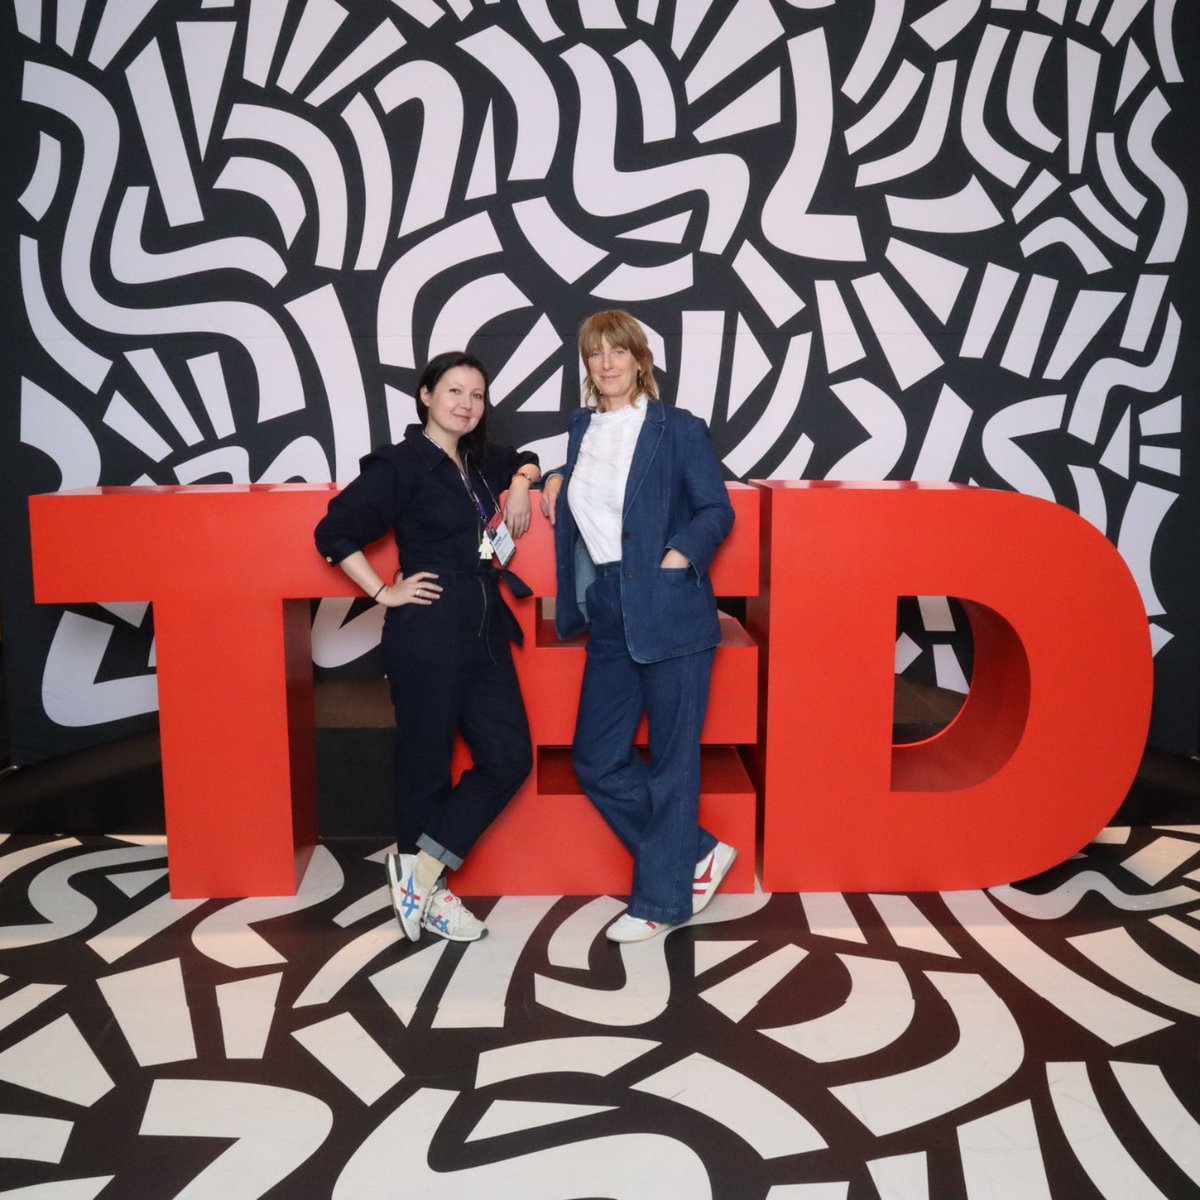 Proud to be a @TEDFellow every day, and indebted to an organization and community that helped me expand my definition of me to unforeseen proportions, embraced and rewarded my awkwardness, and changed my life forever ❤️ No self is final.